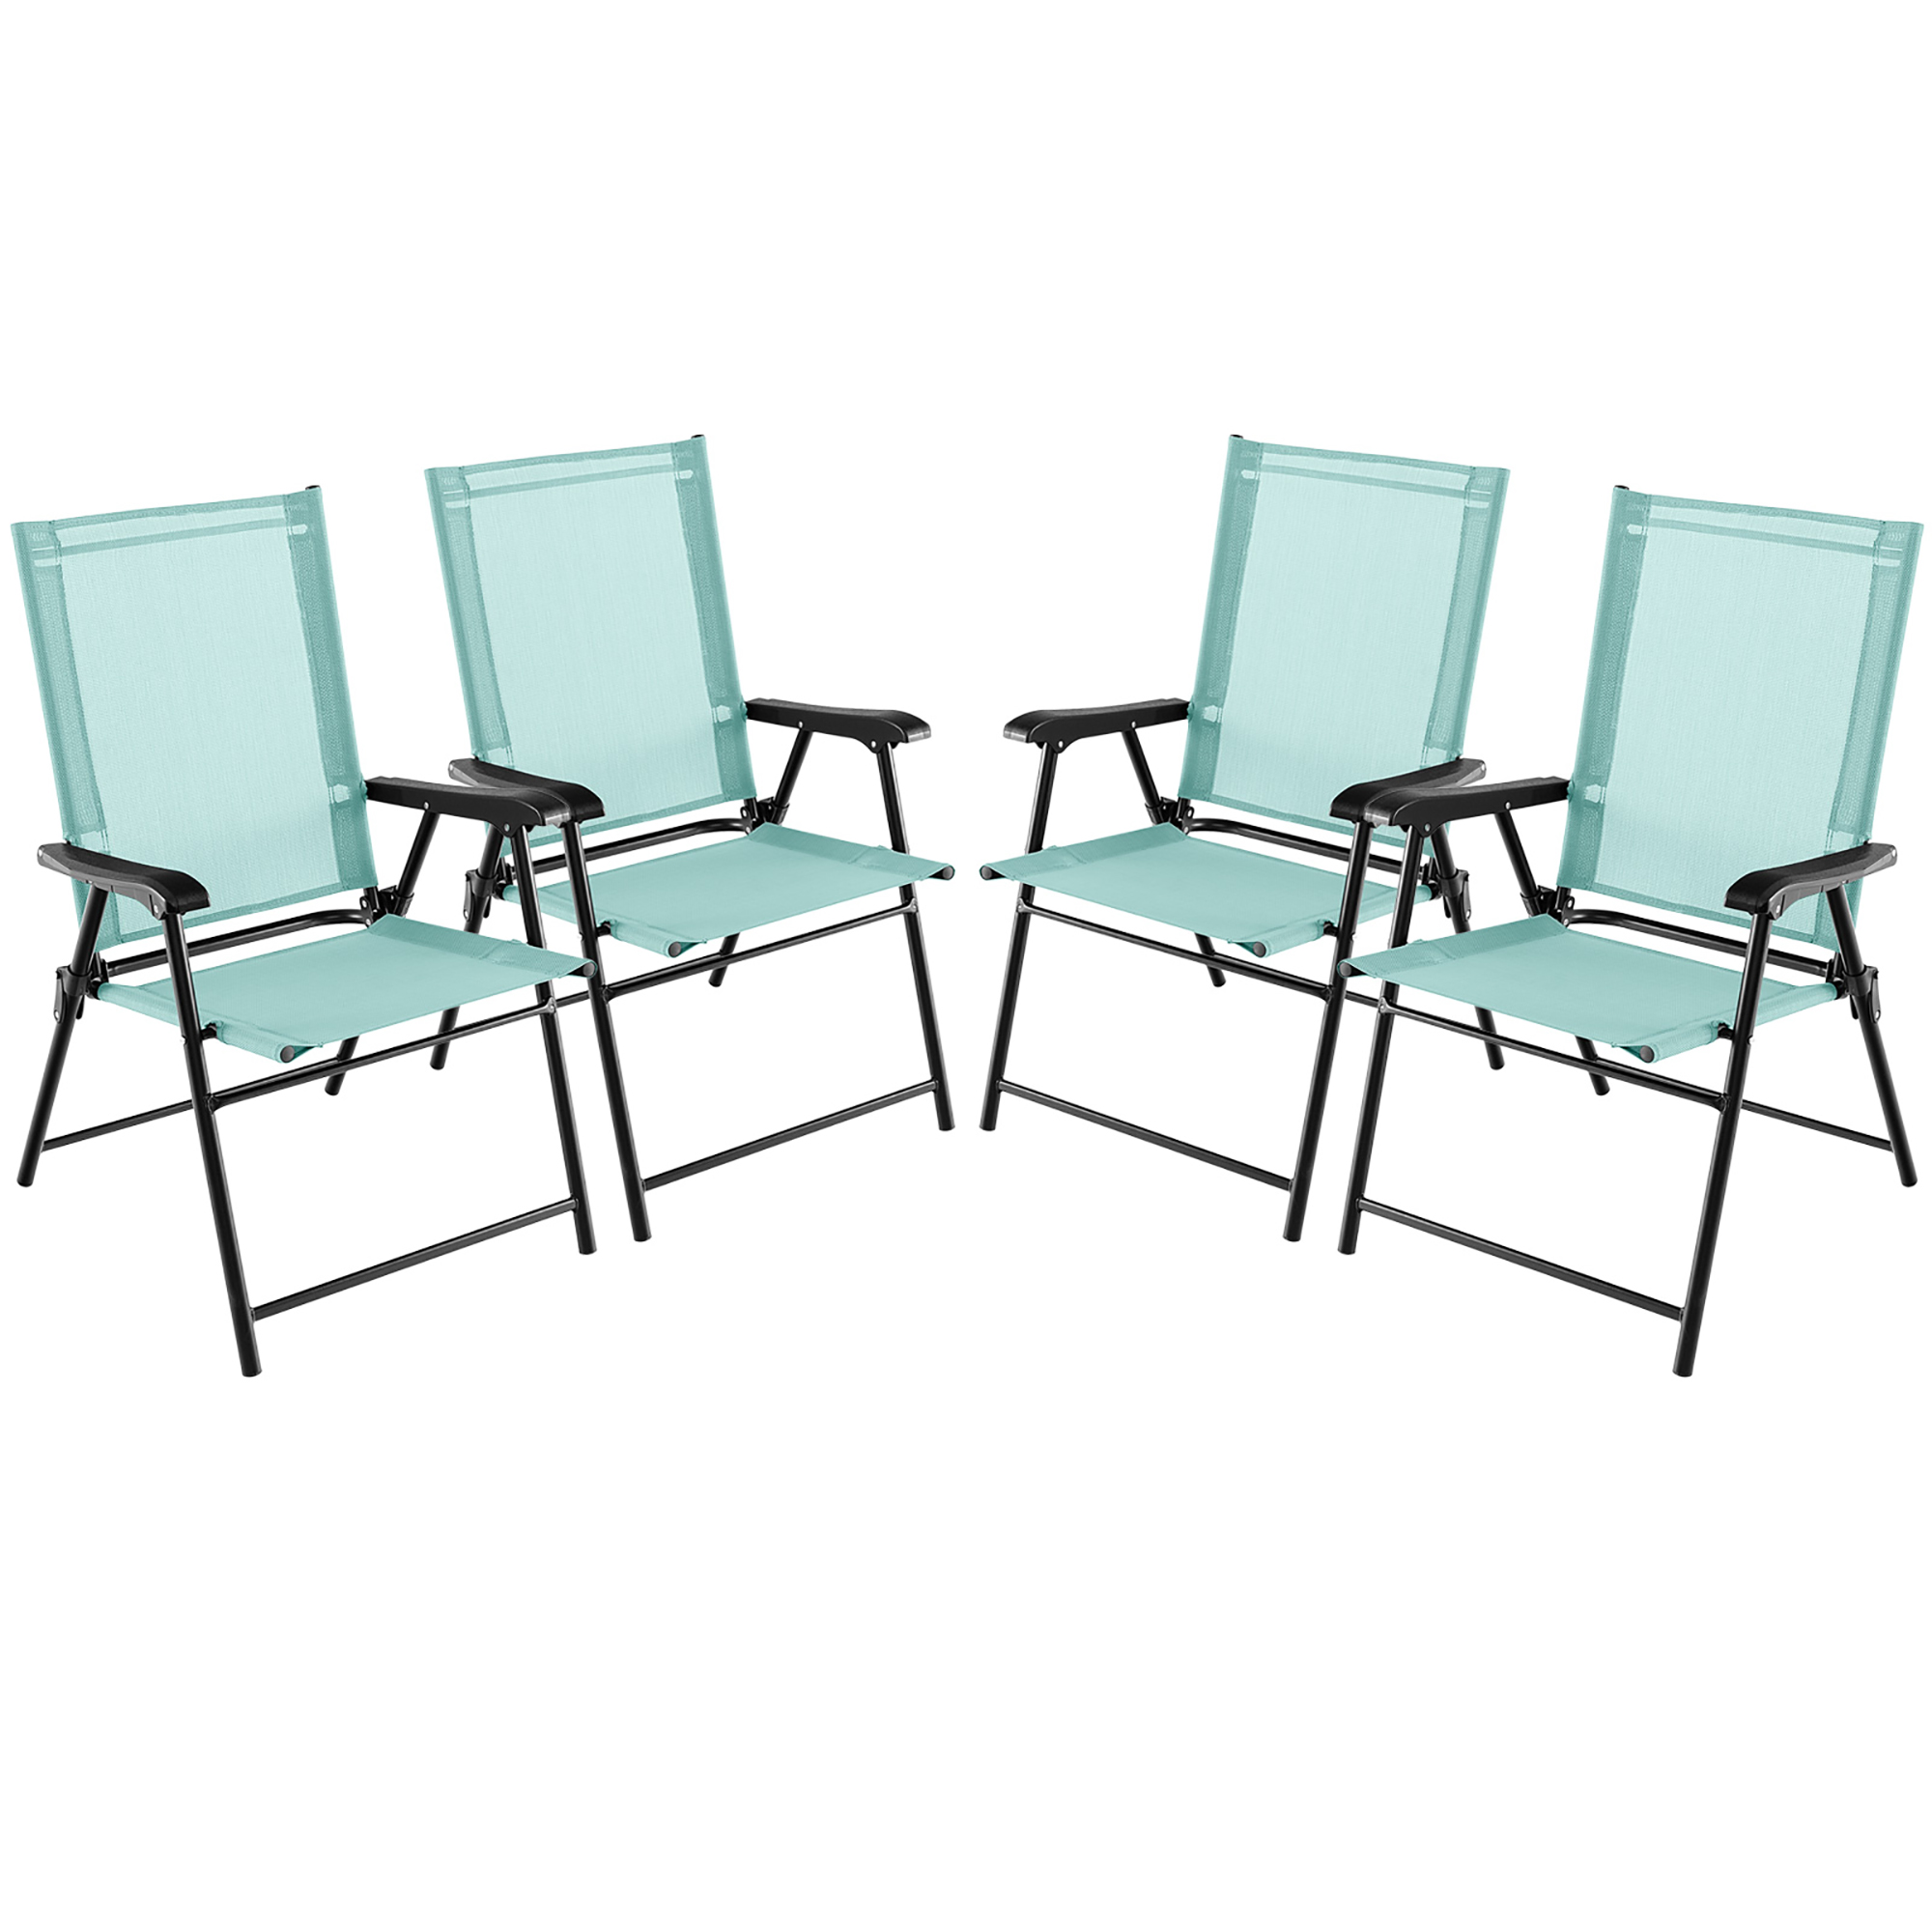 Gymax Set of 4 Patio Folding Chairs Outdoor Portable Pack Lawn Chairs w/ Armrests Mint Green - image 1 of 10